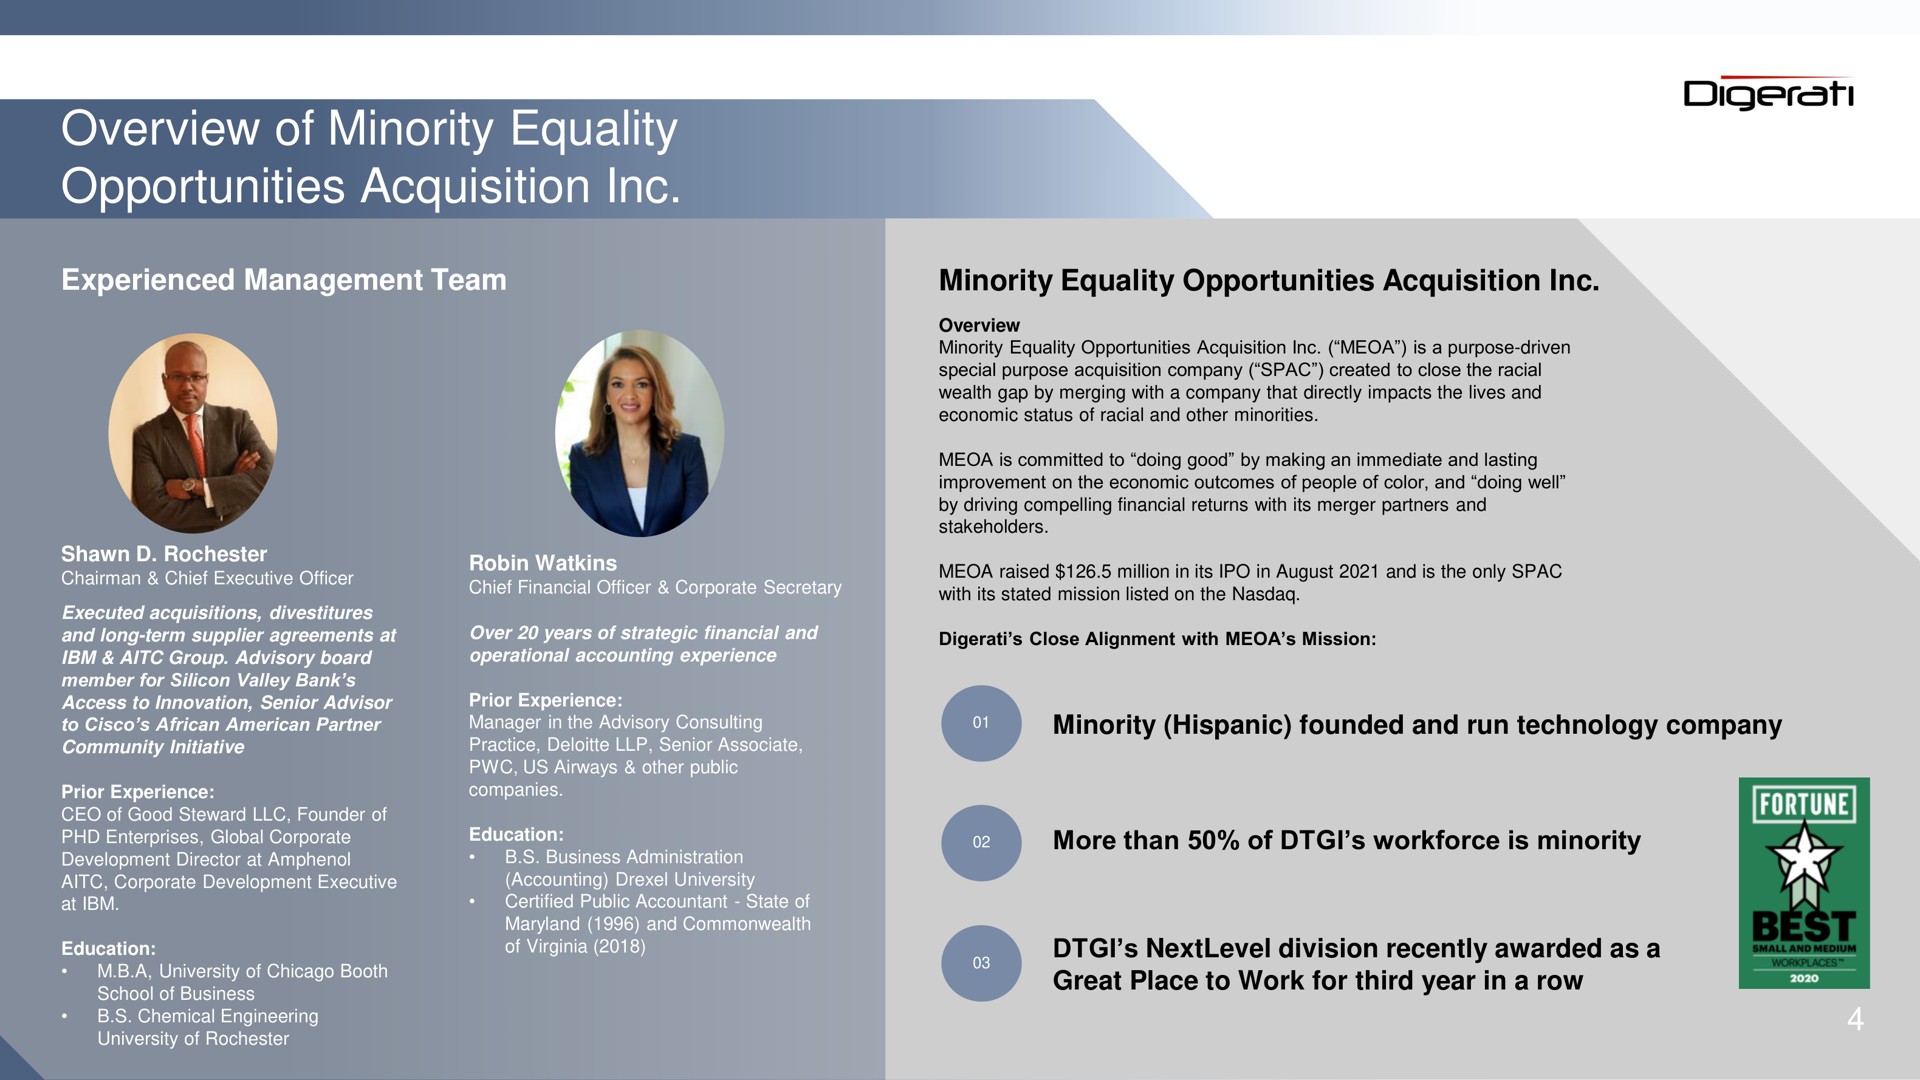 overview of minority equality opportunities acquisition | Digerati